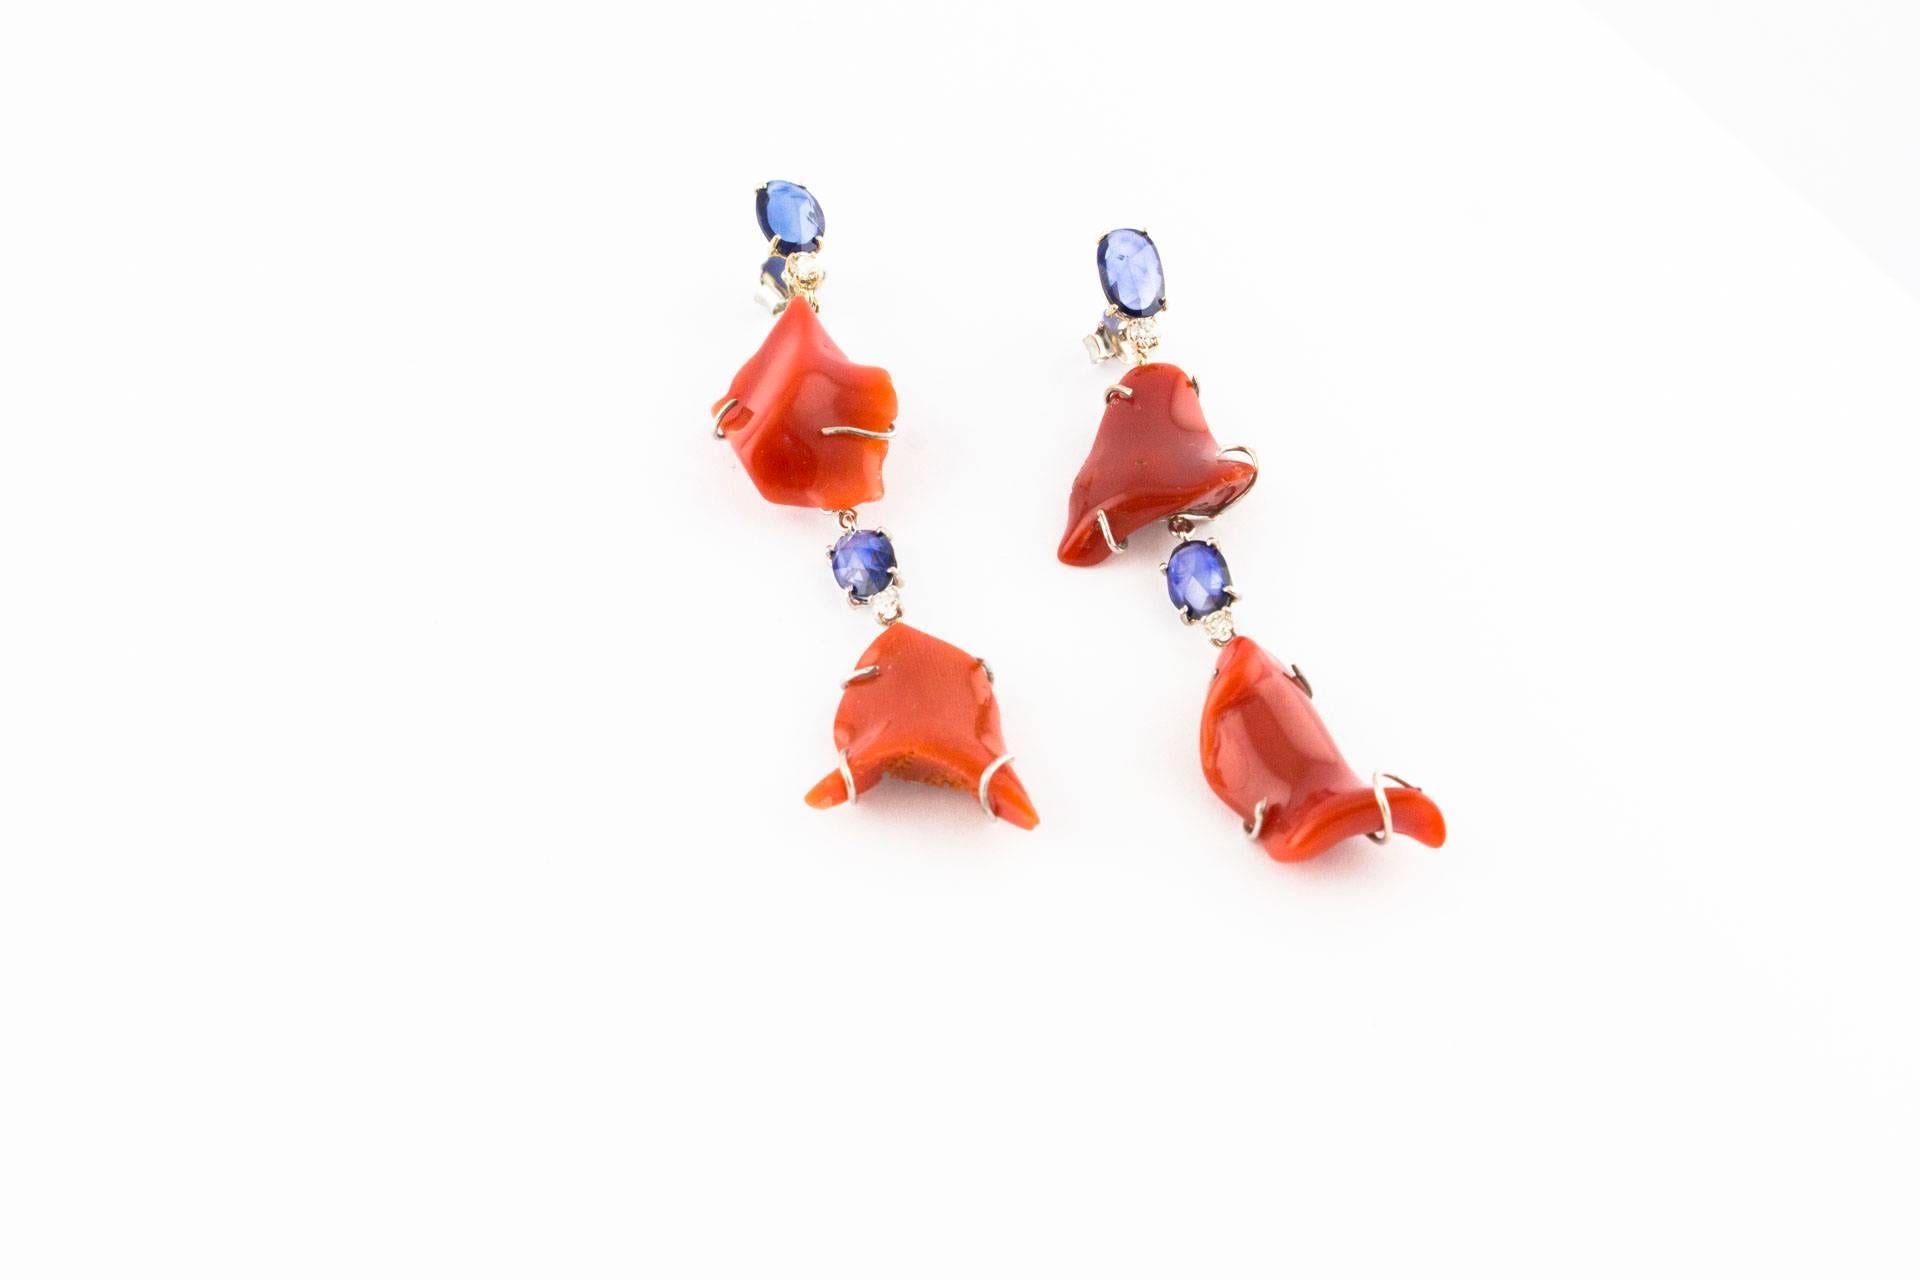 SHIPPING POLICY: 
No additional costs will be added to this order. 
Shipping costs will be totally covered by the seller (customs duties included).

Charming dangle earrings composed of 3 corals linked with blue sapphire and diamonds, all is mounted